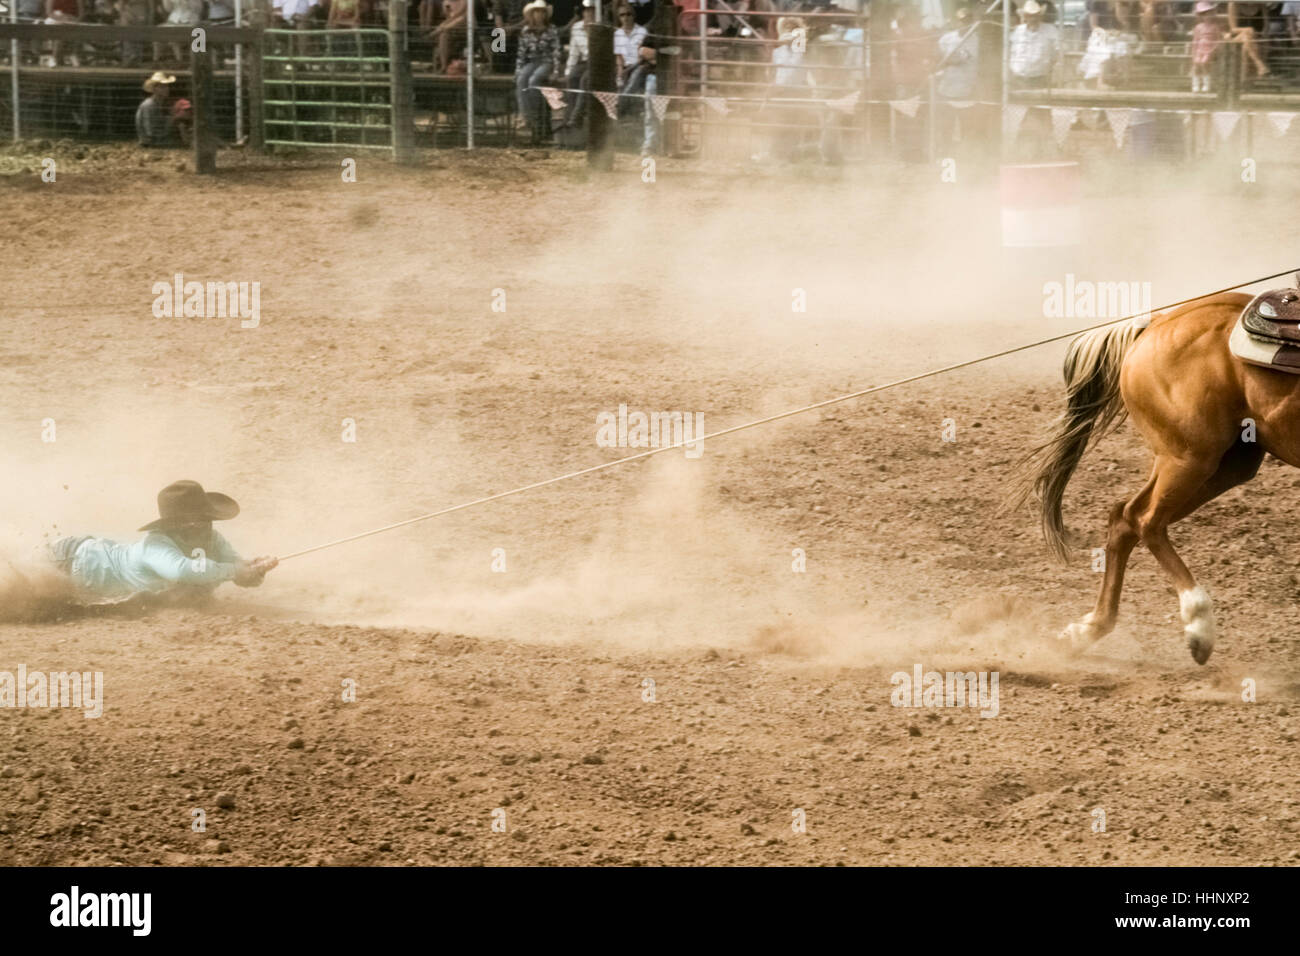 Horse dragging cowboy by rope in rodeo Stock Photo